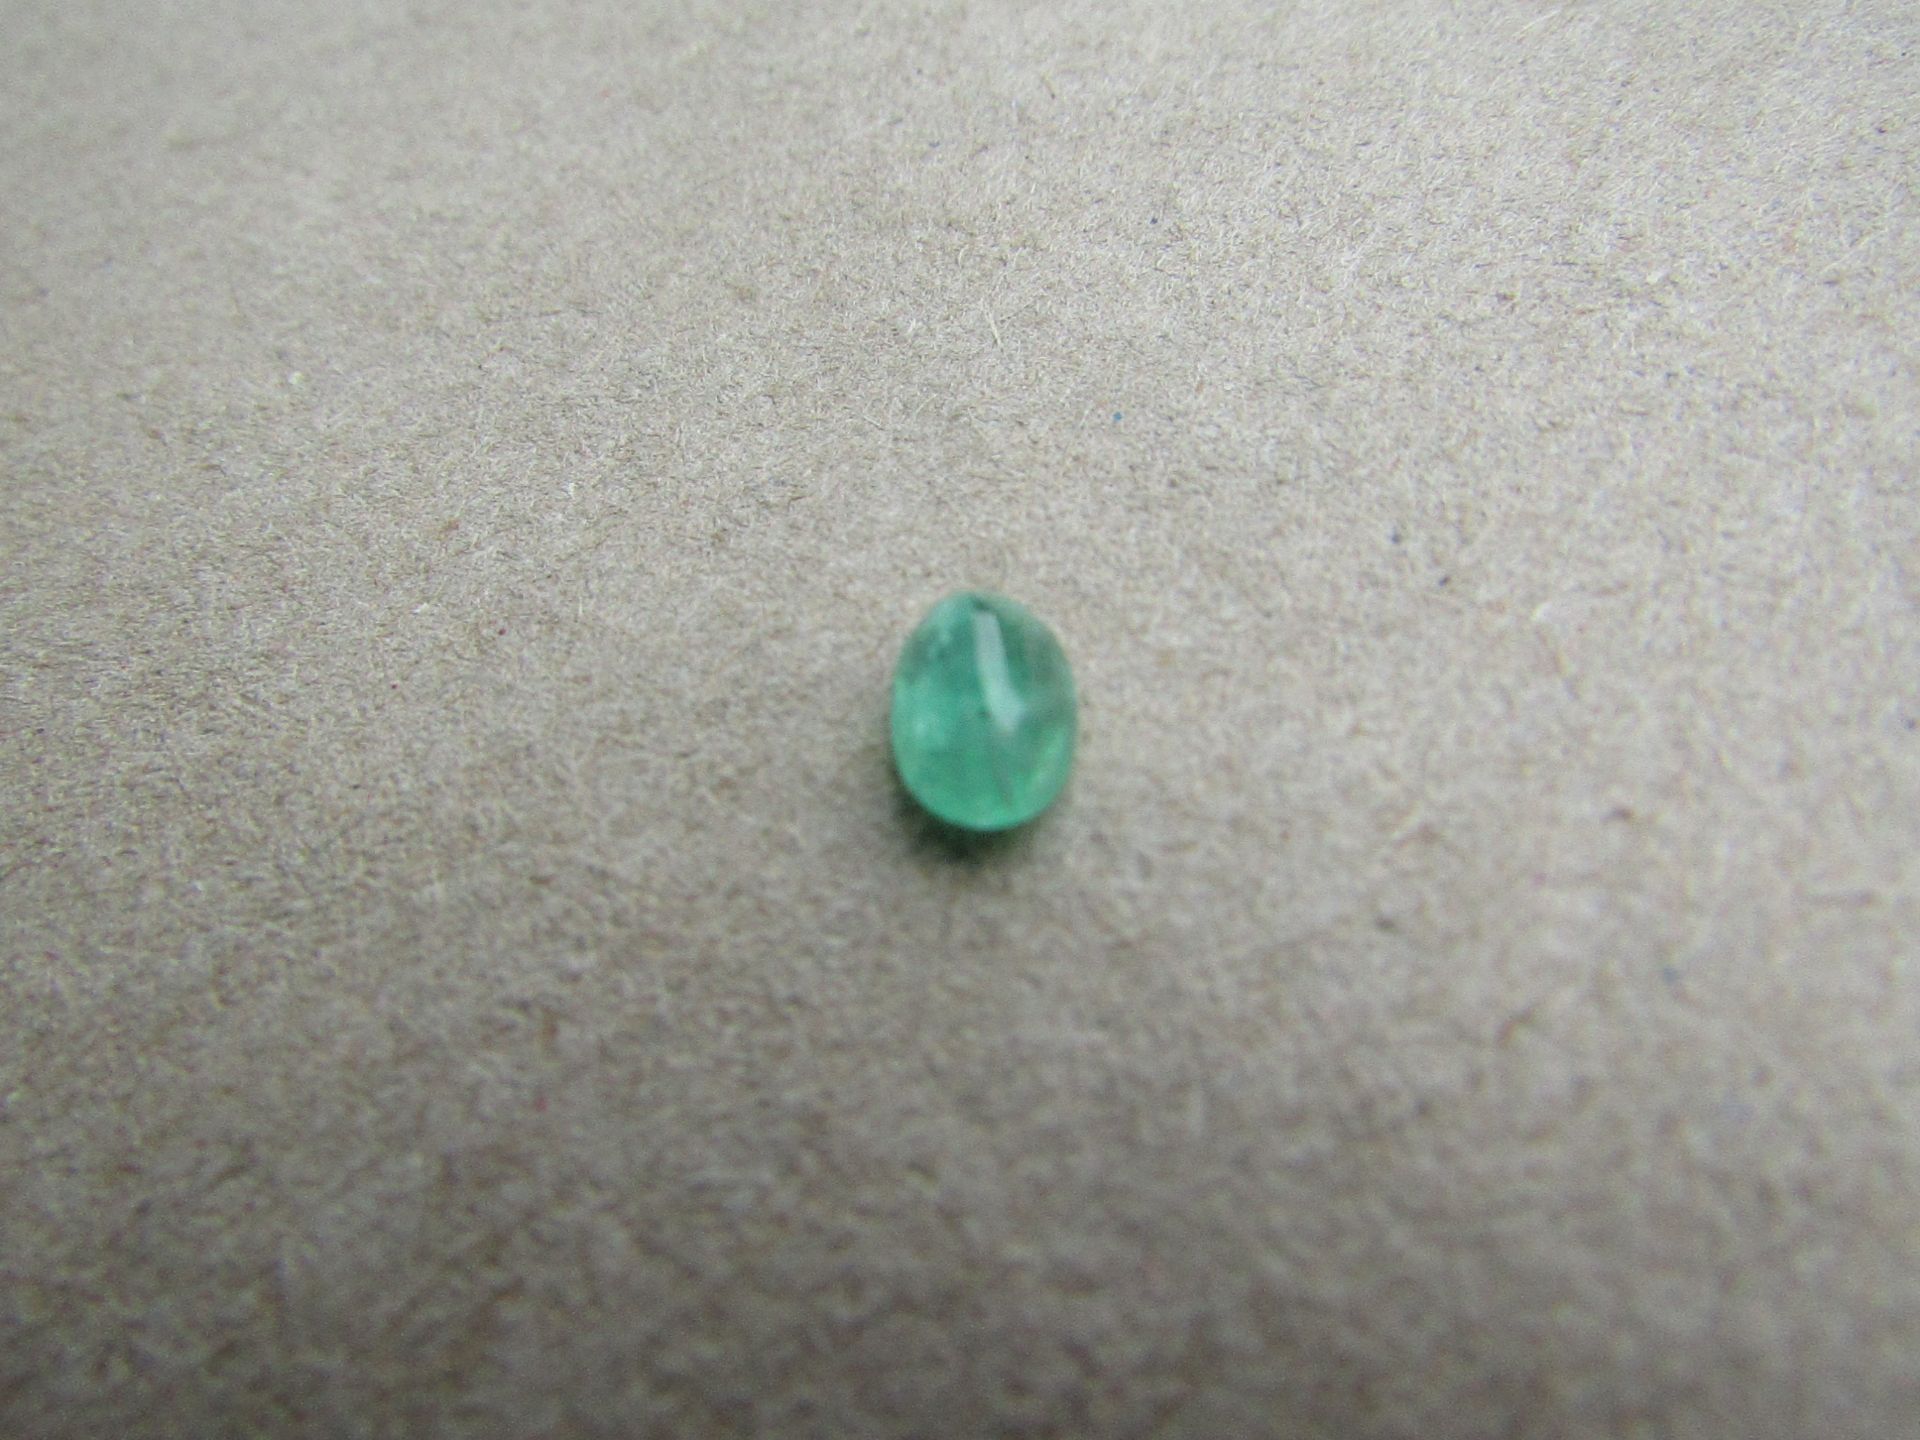 Natural Emerald 0.81 Carat Average retail value Gemstone type: Emerald Weight: 0.81 cts. Colour: 087